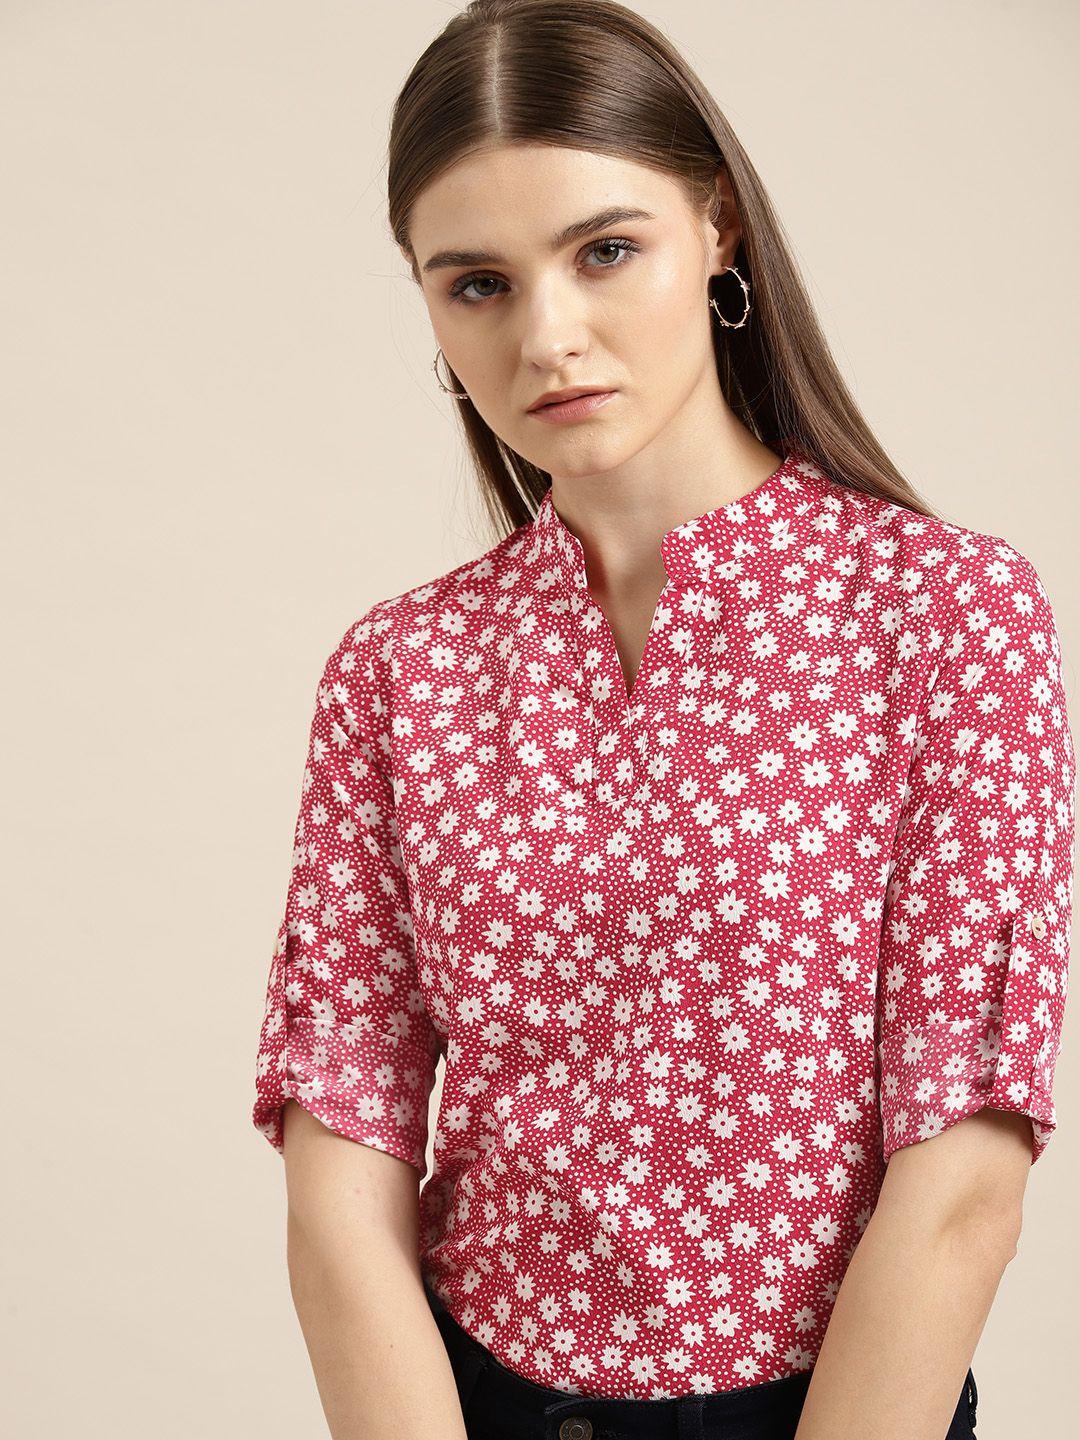 her-by-invictus-floral-print-mandarin-collar-roll-up-sleeves-top